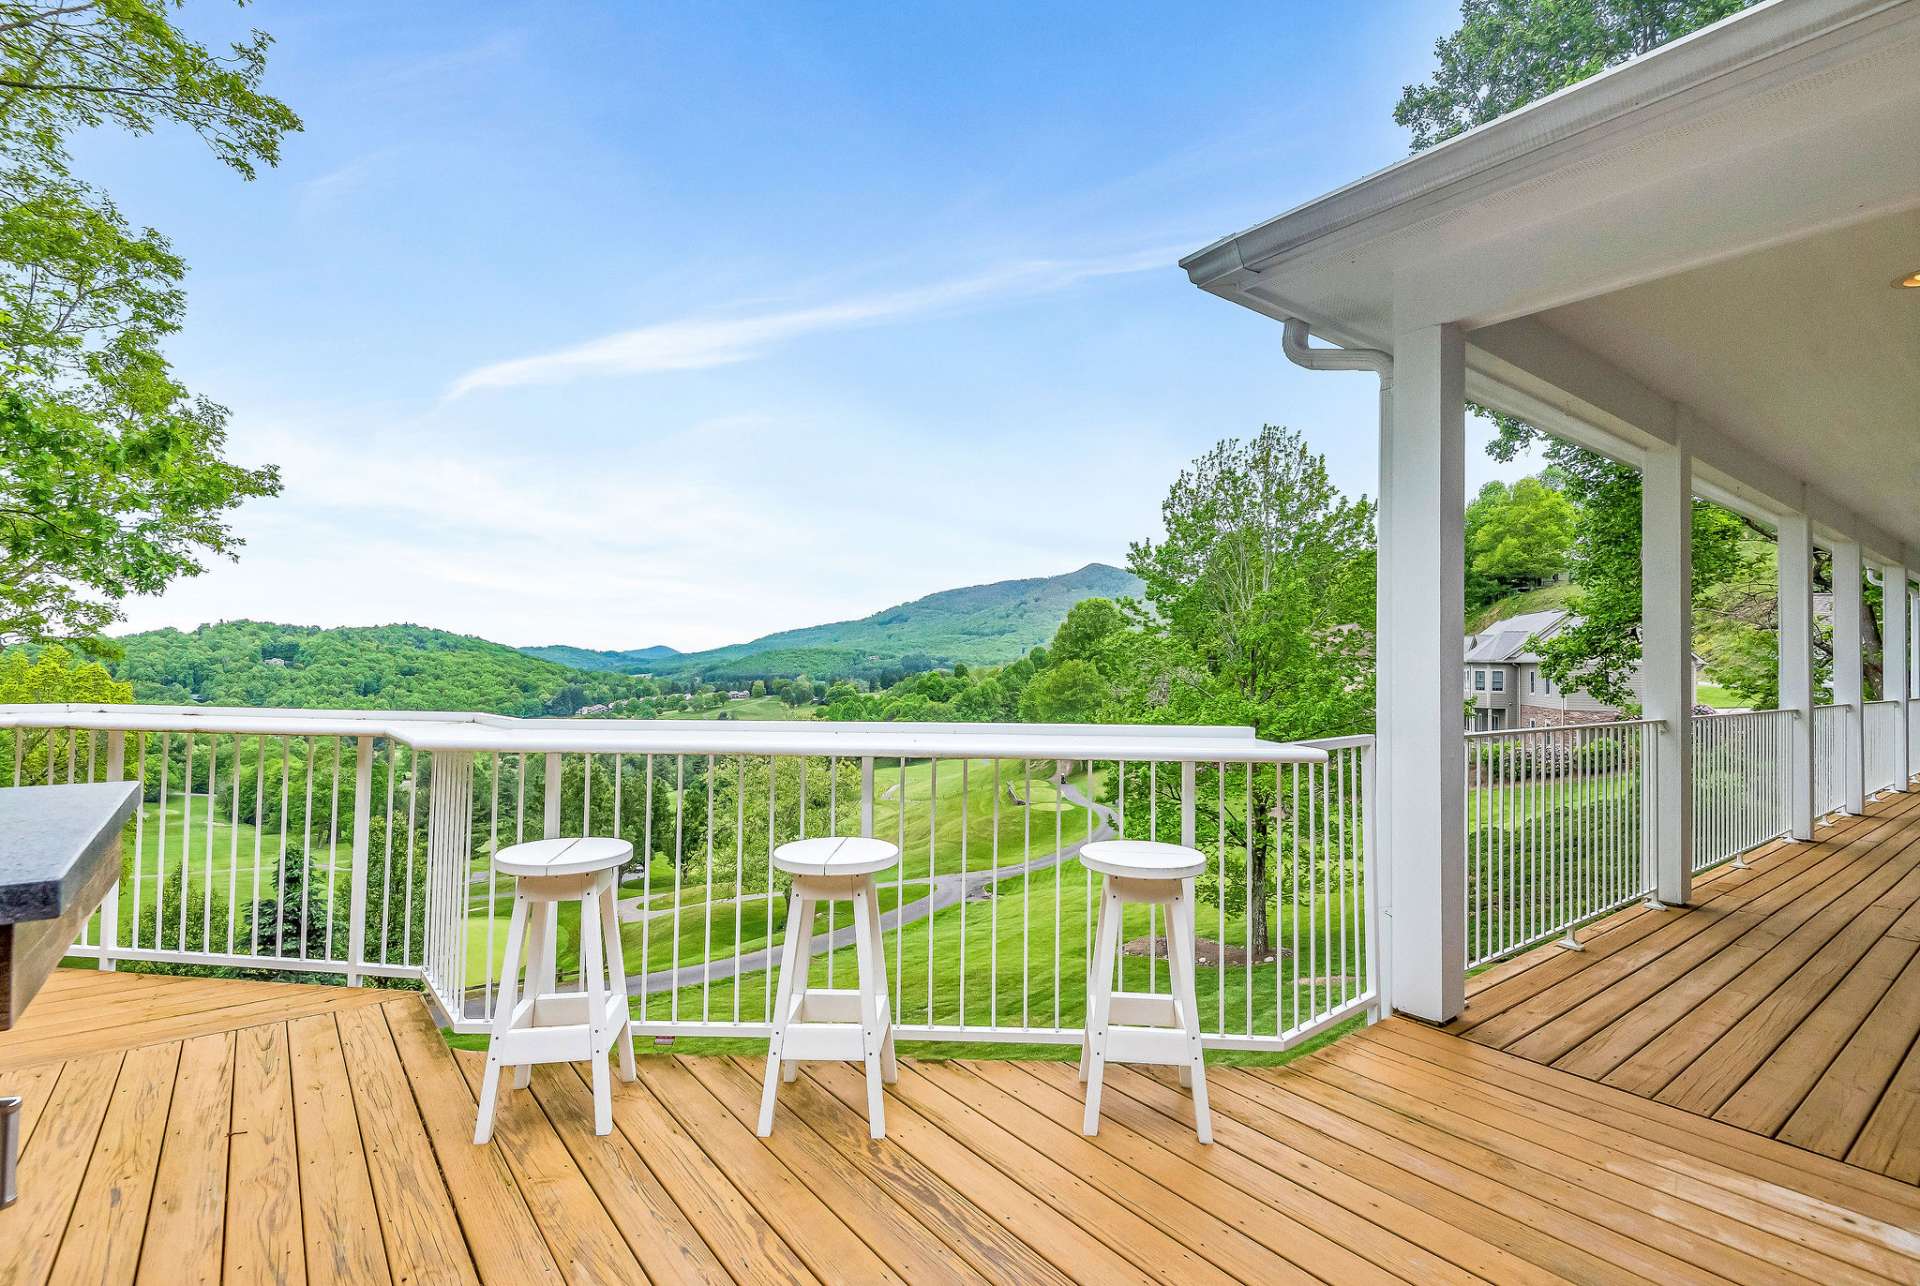 Picture yourself standing on the deck of your dream home nestled within the picturesque landscape of Mountain Aire Golf Course. As you gaze outwards, Fairway #5 unfolds beneath your eyes, a verdant ribbon winding its way through the meticulously manicured greenery.